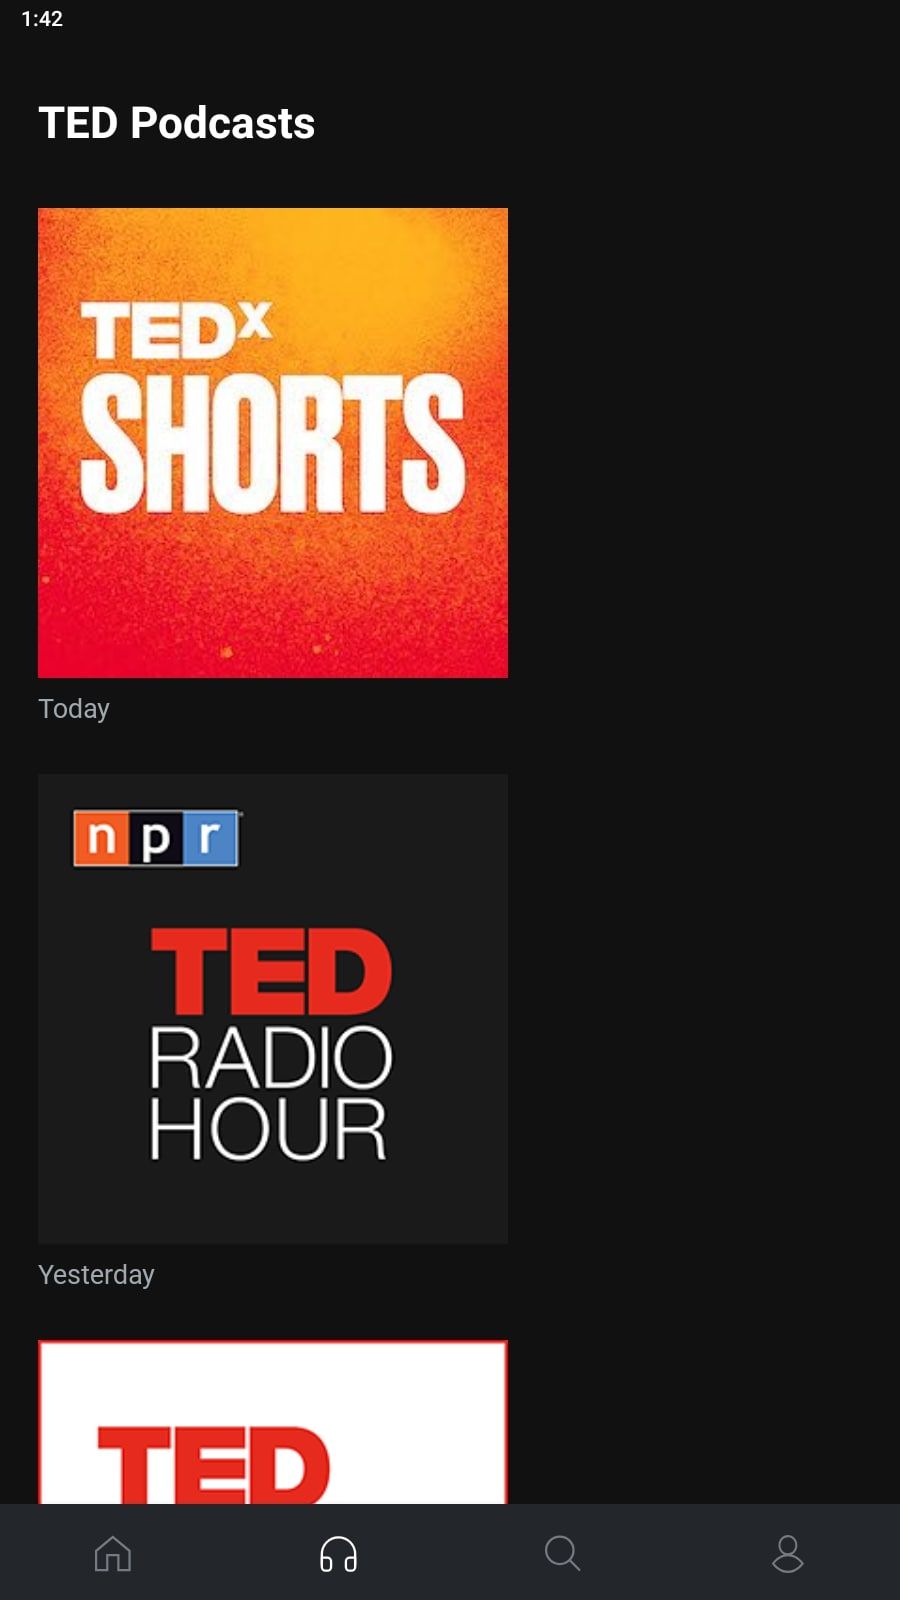 Podcast section in TED